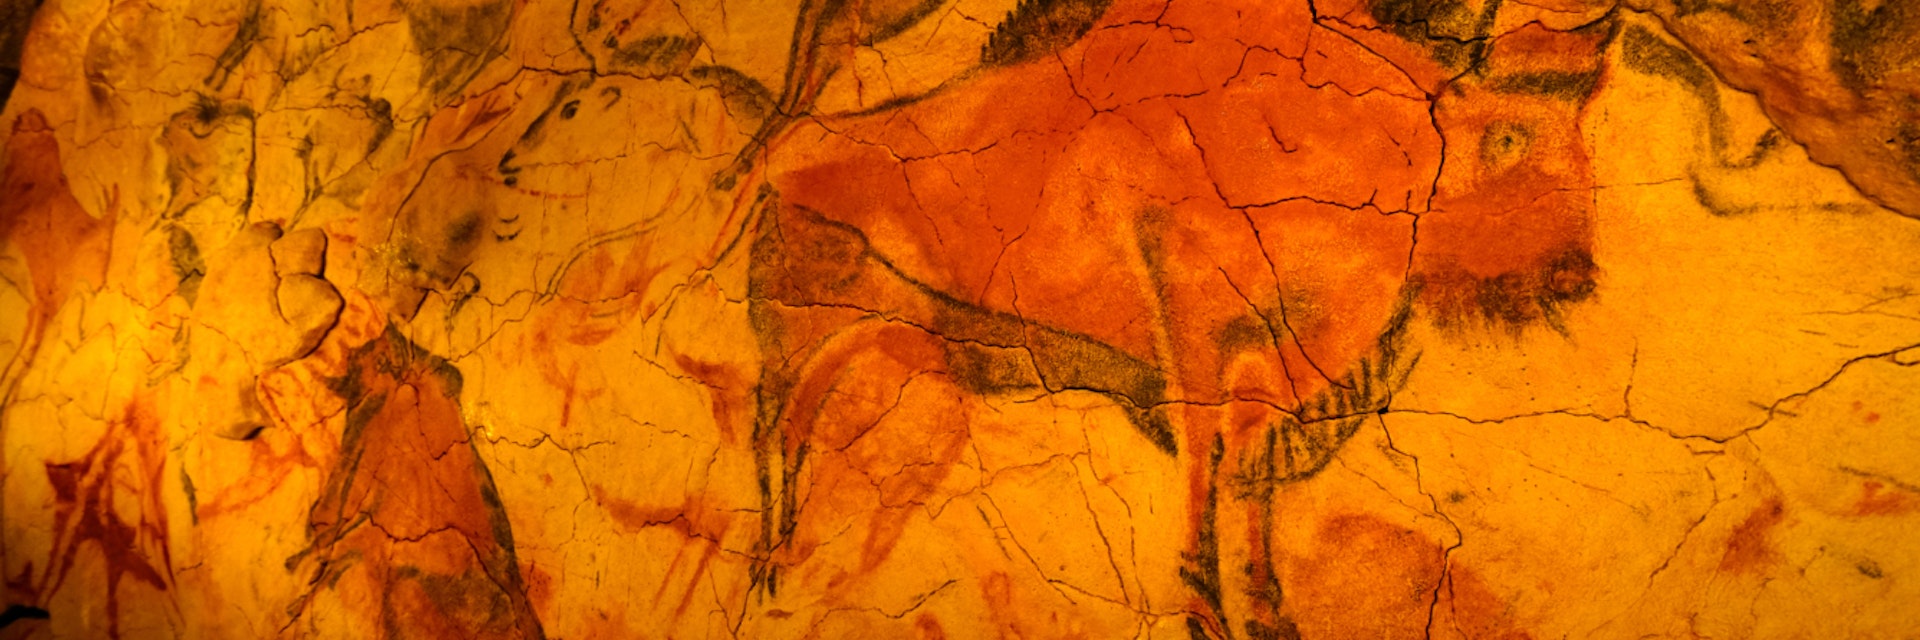 ALTAMIRA, SPAIN -10 JUN 2017- The National Museum and Research Center of Altamira is a museum with replica of the cave of Altamira with its prehistoric rock art. It is a UNESCO World Heritage Site.; Shutterstock ID 664589344